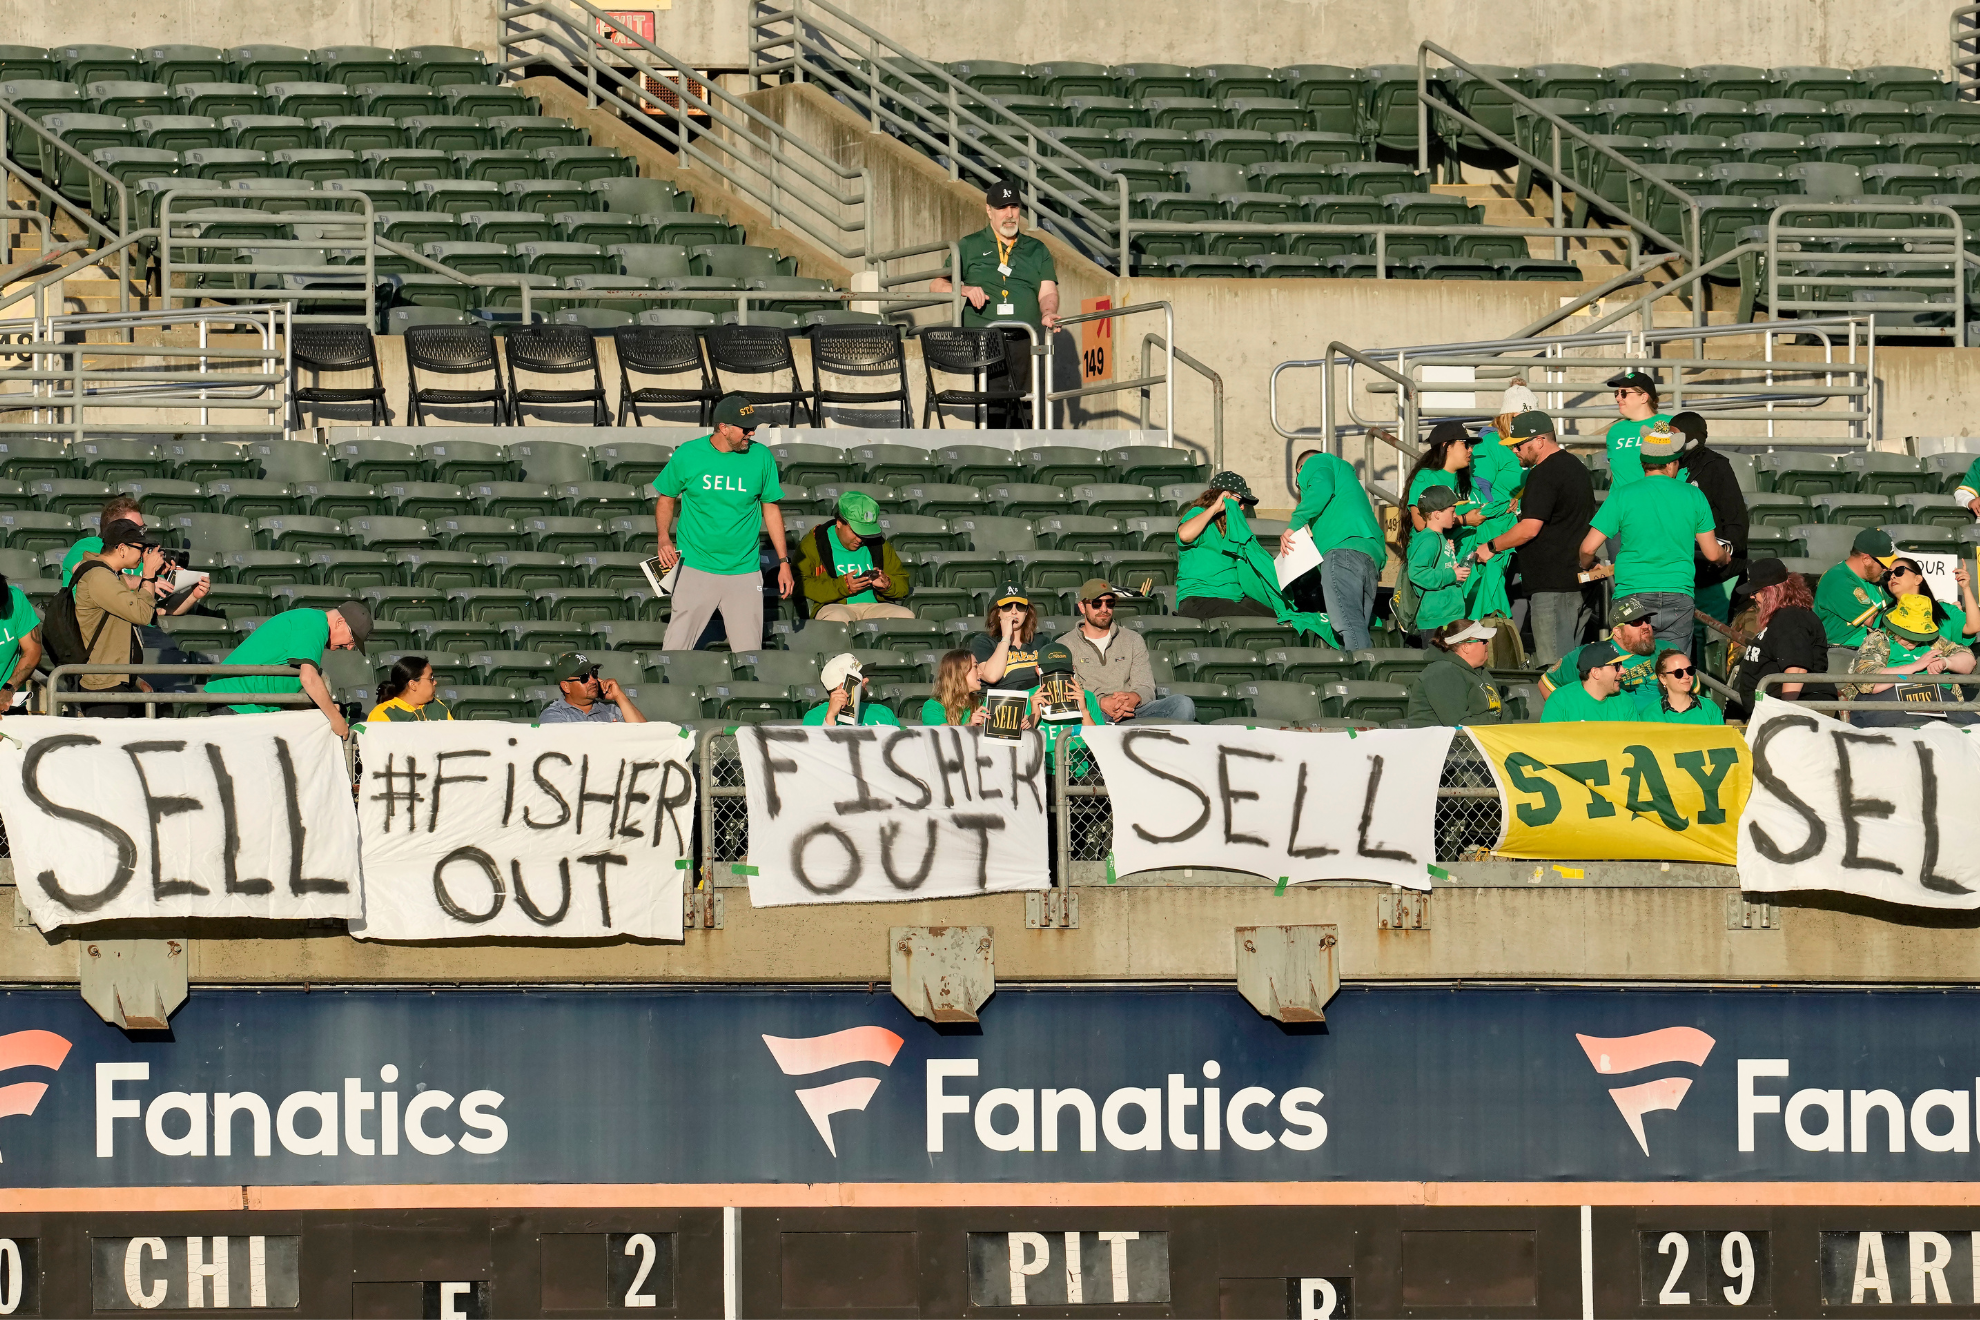 A's fans demanding owner John Fisher to sell the team, in hopes it remains in Oakland.